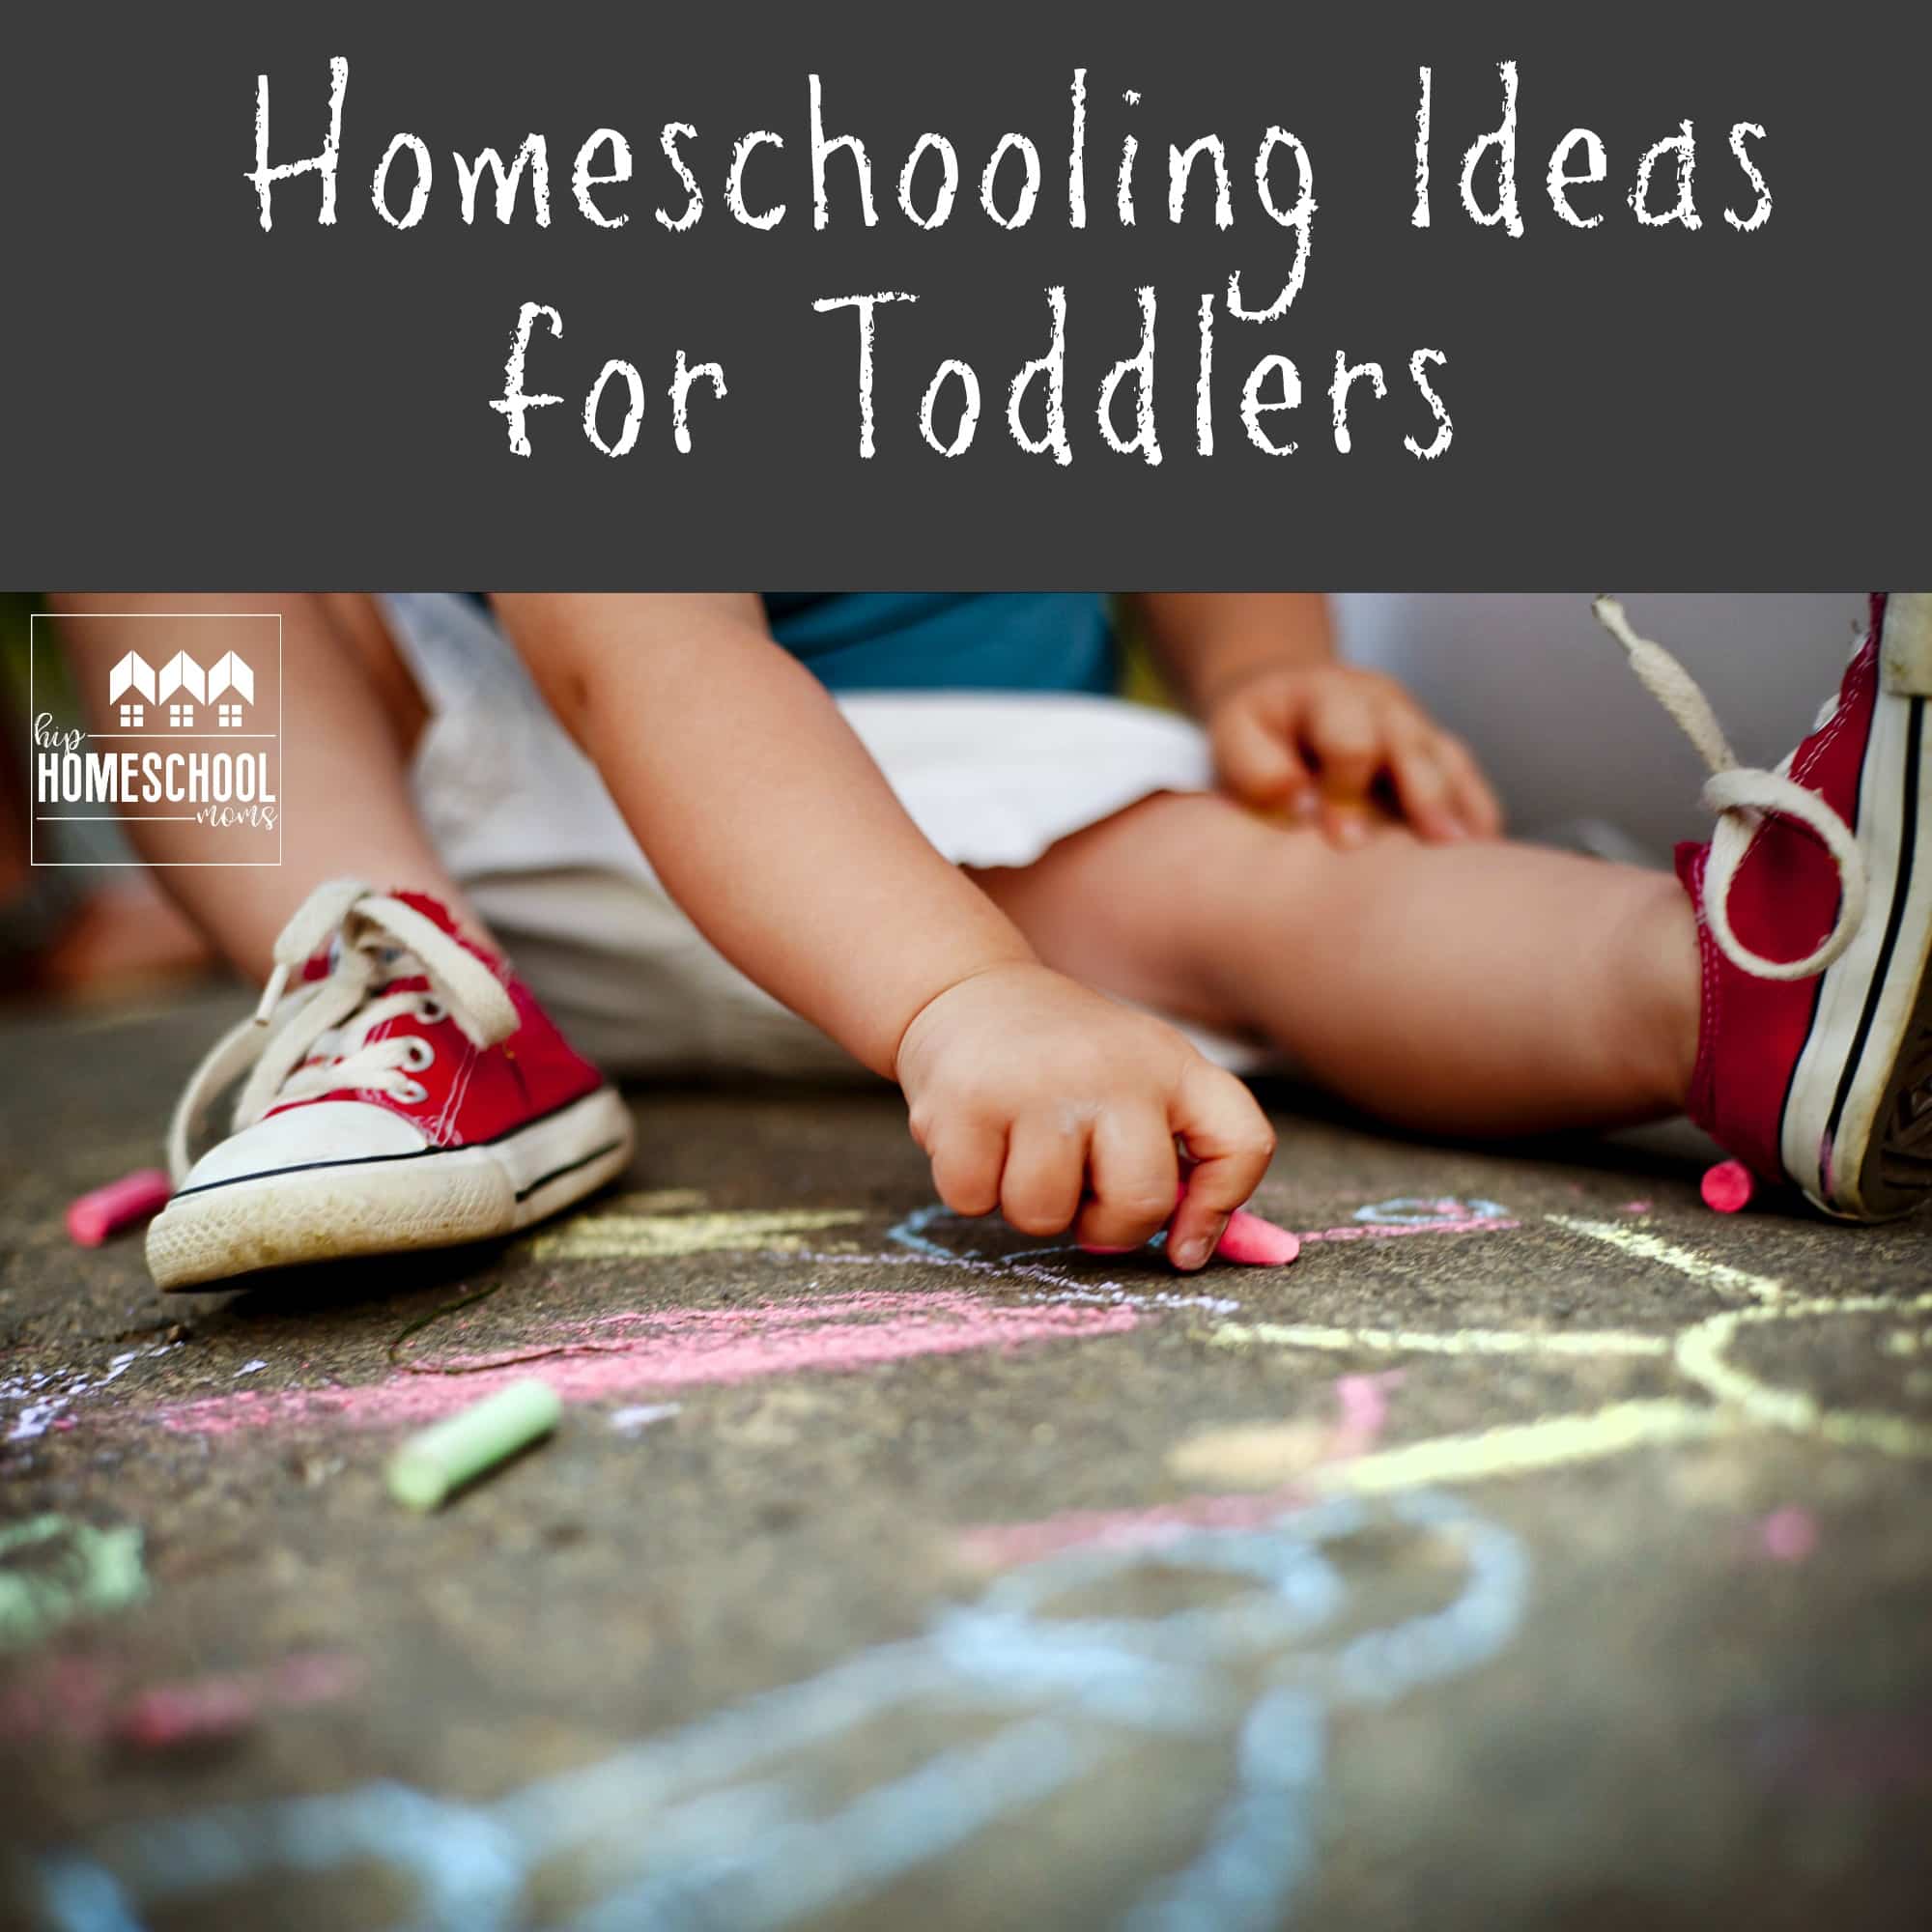 Homeschooling Ideas for Toddlers